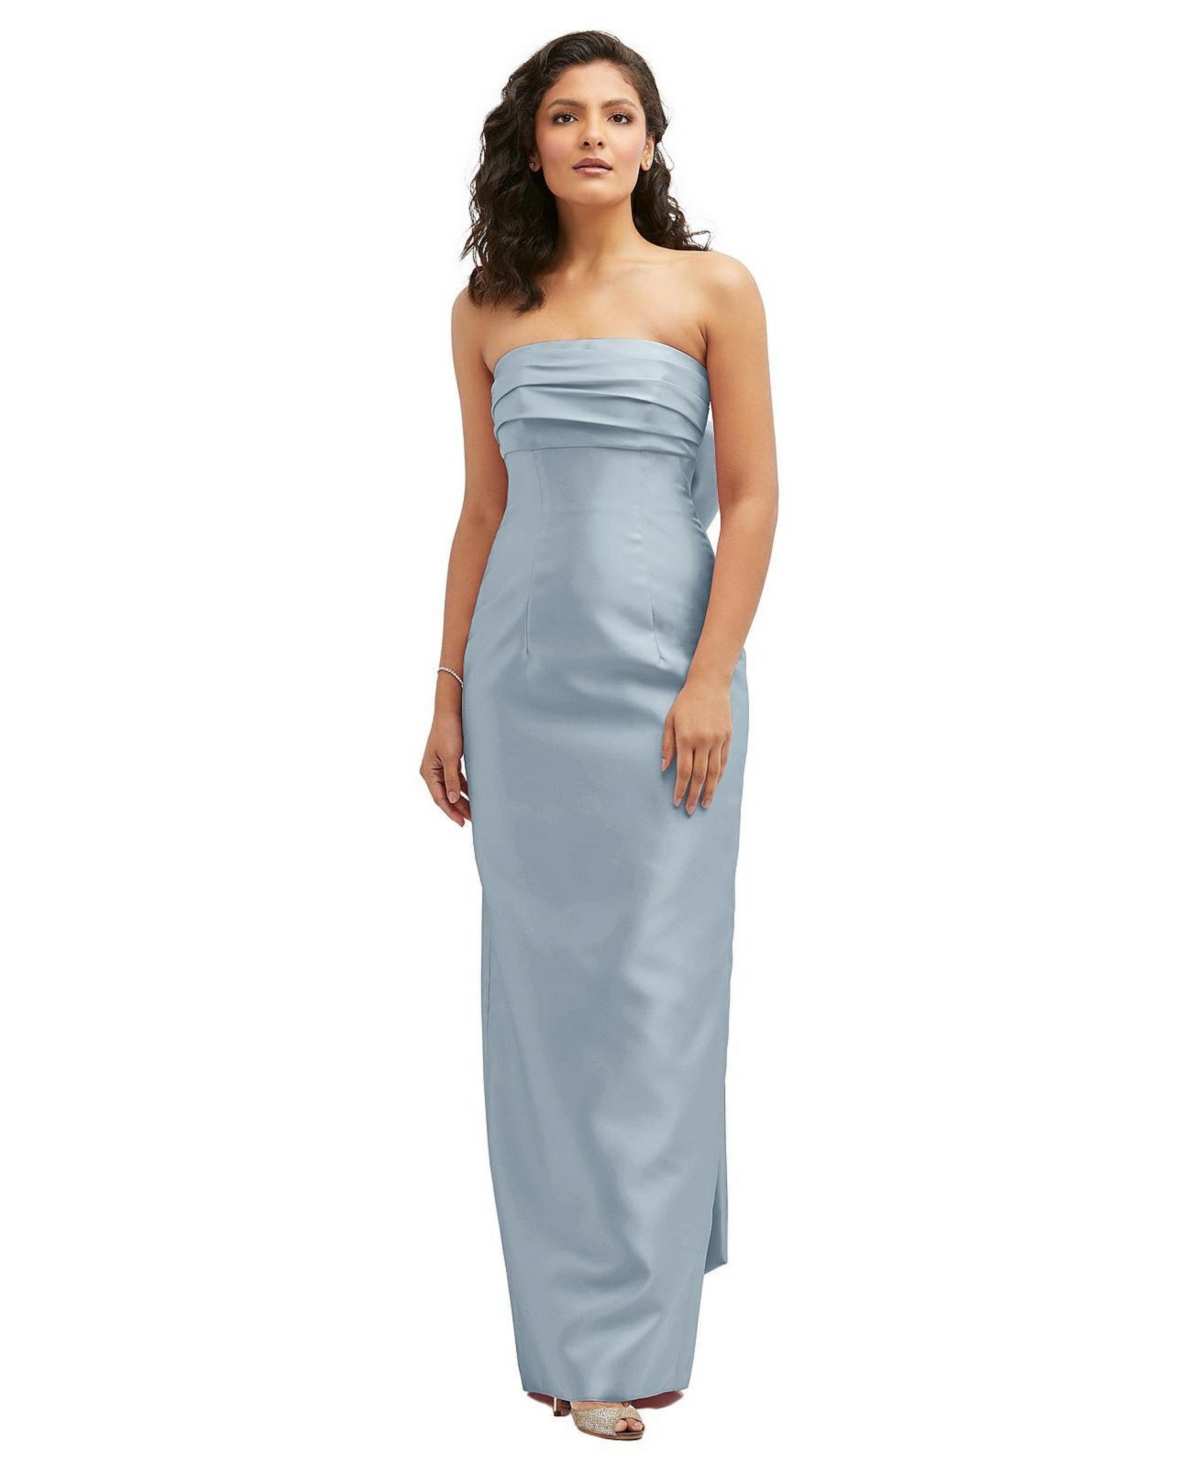 ALFRED SUNG STRAPLESS DRAPED BODICE COLUMN DRESS WITH OVERSIZED BOW